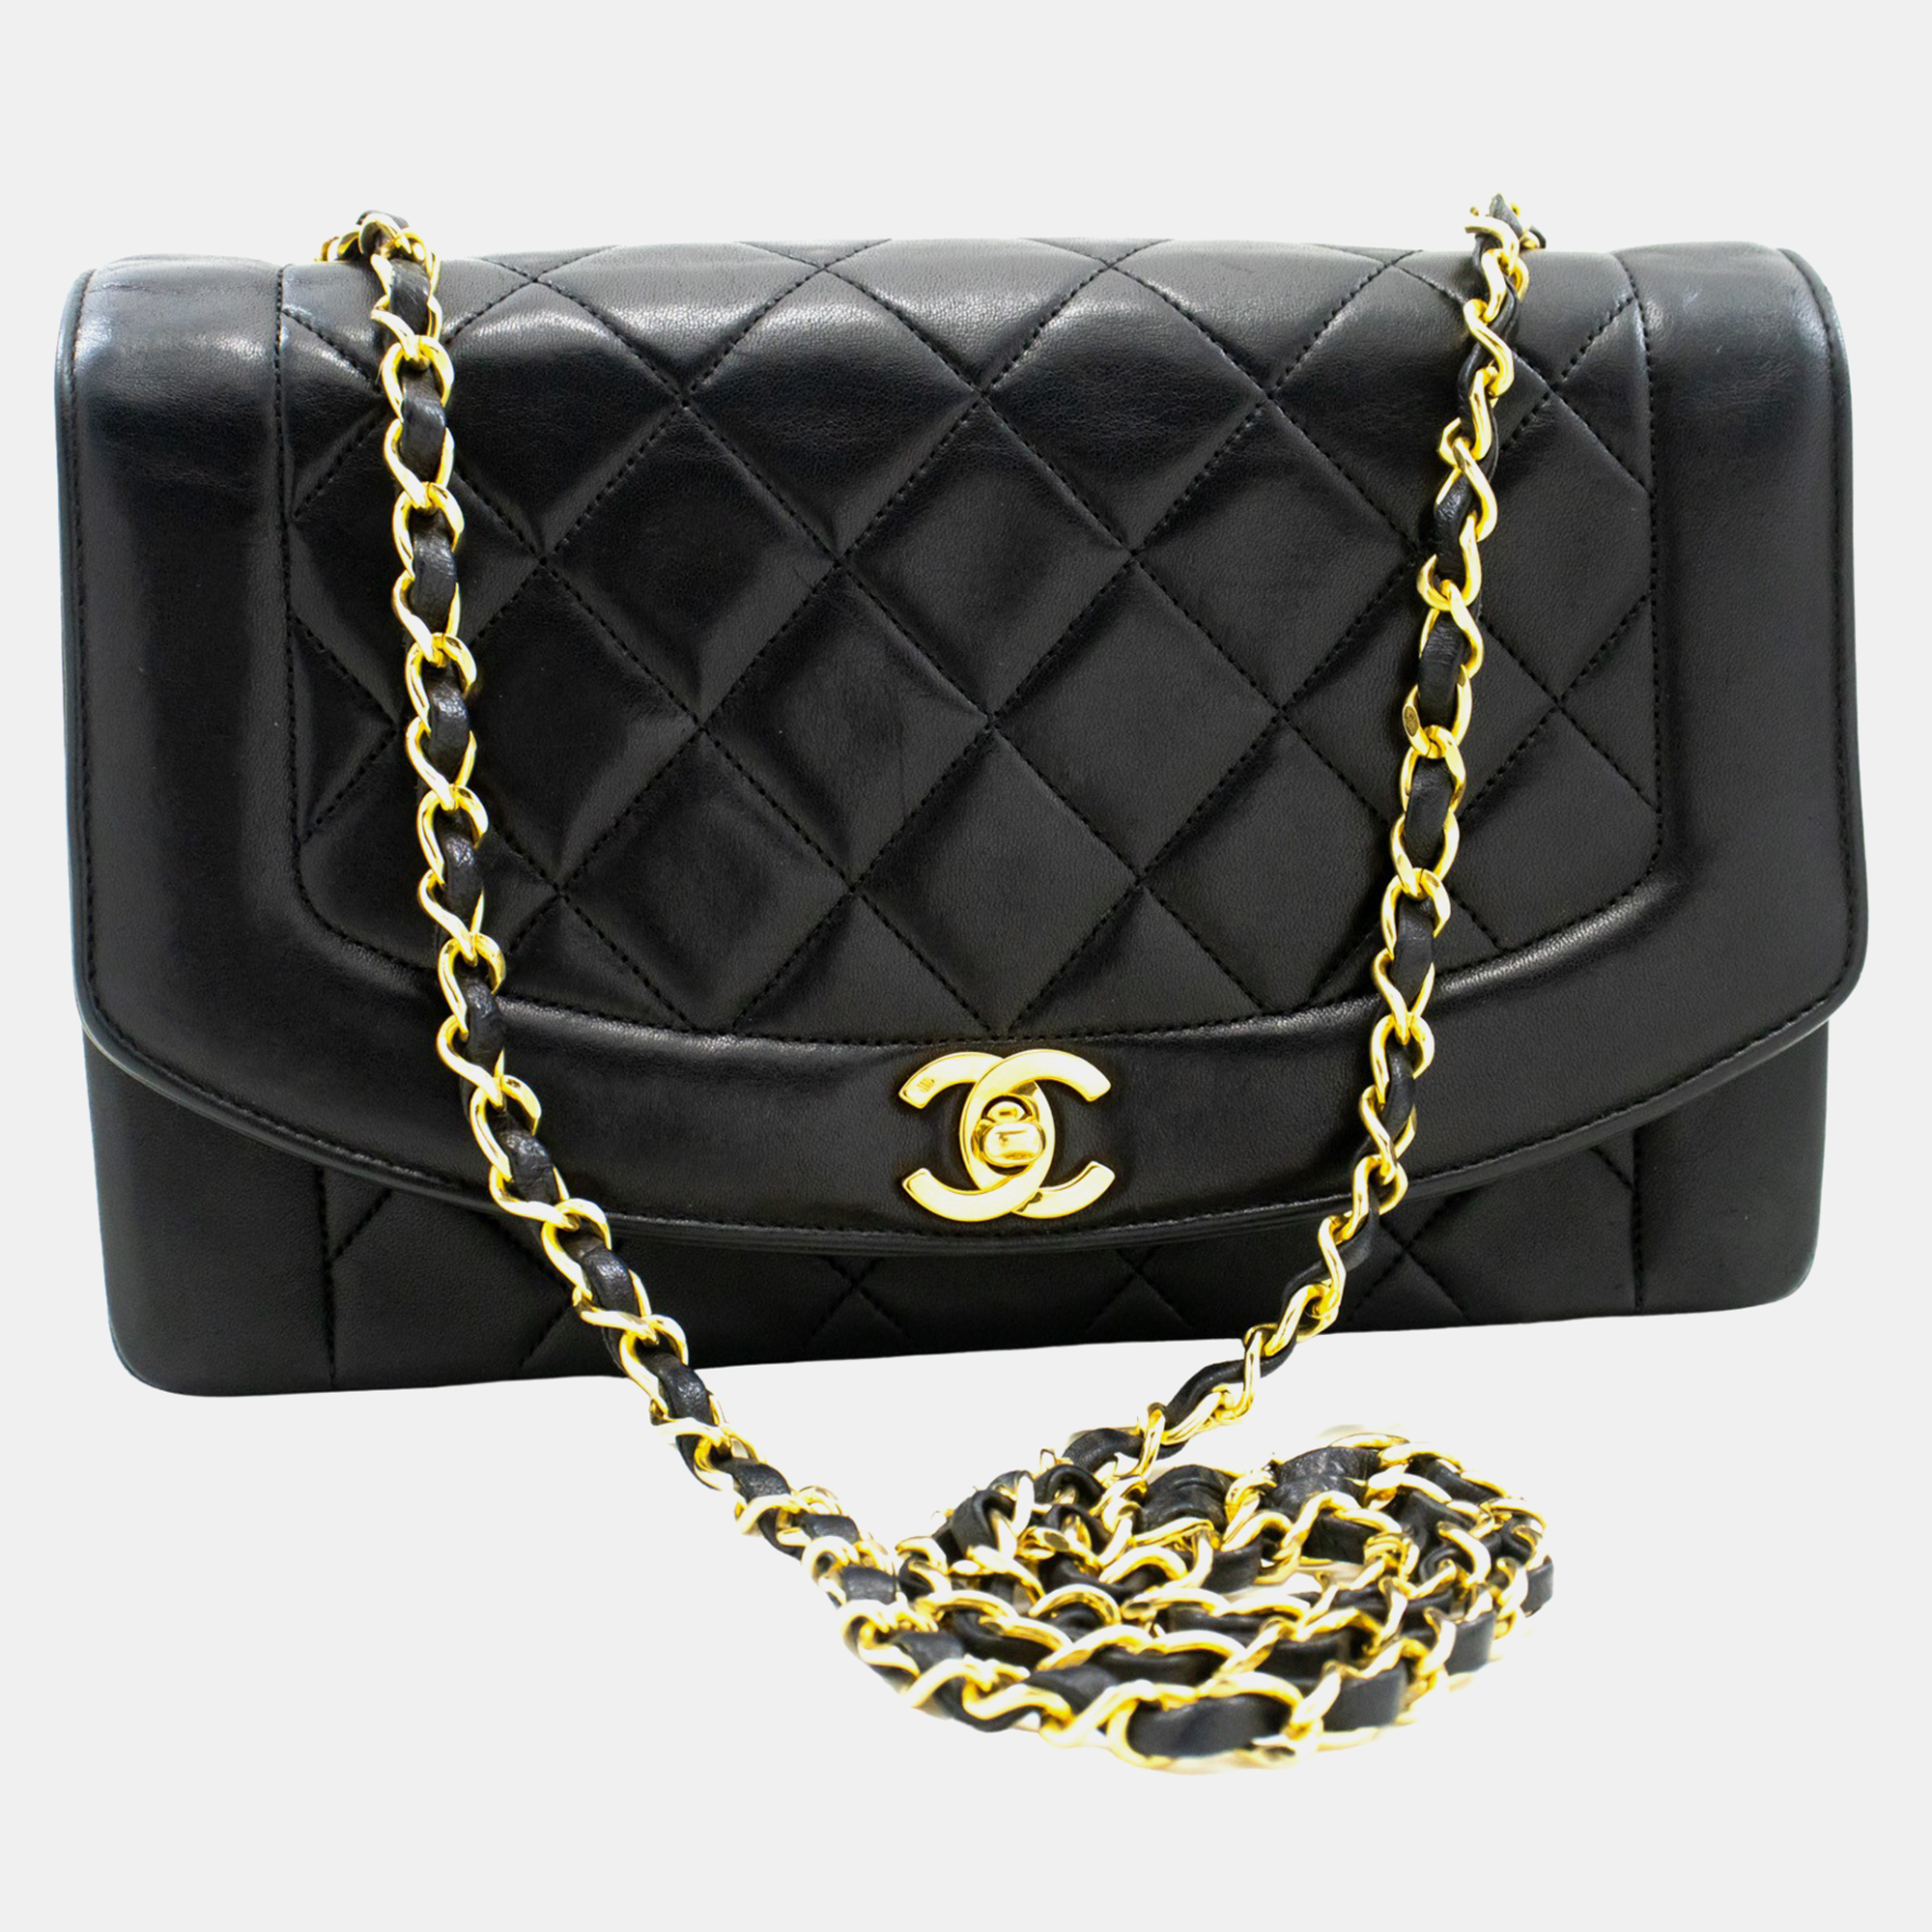 Pre-owned Chanel Black Leather Medium Diana Flap Bag